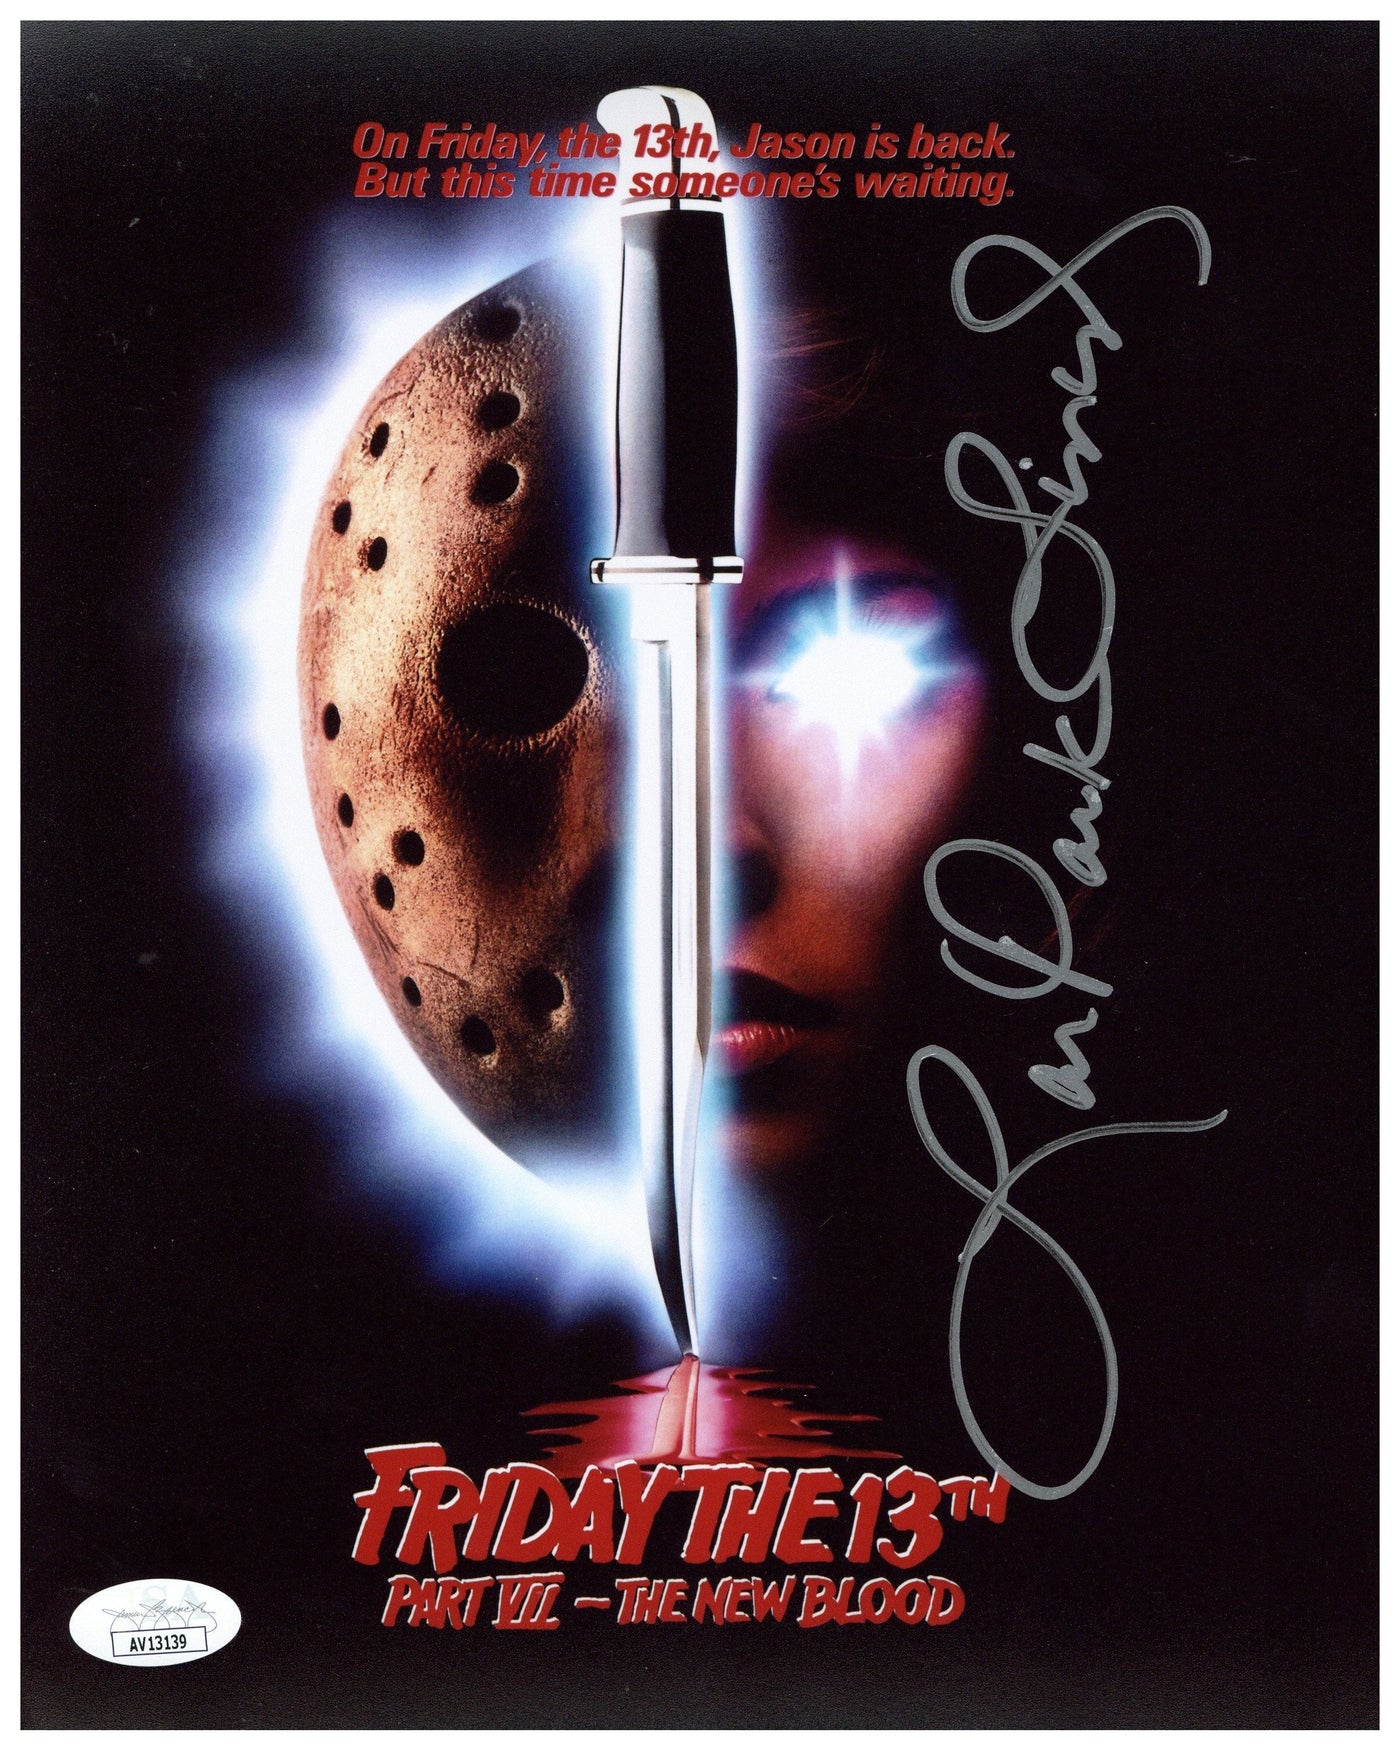 Lar Park Lincoln Signed 8x10 Photo Friday the 13th Part VII Autographed JSA COA